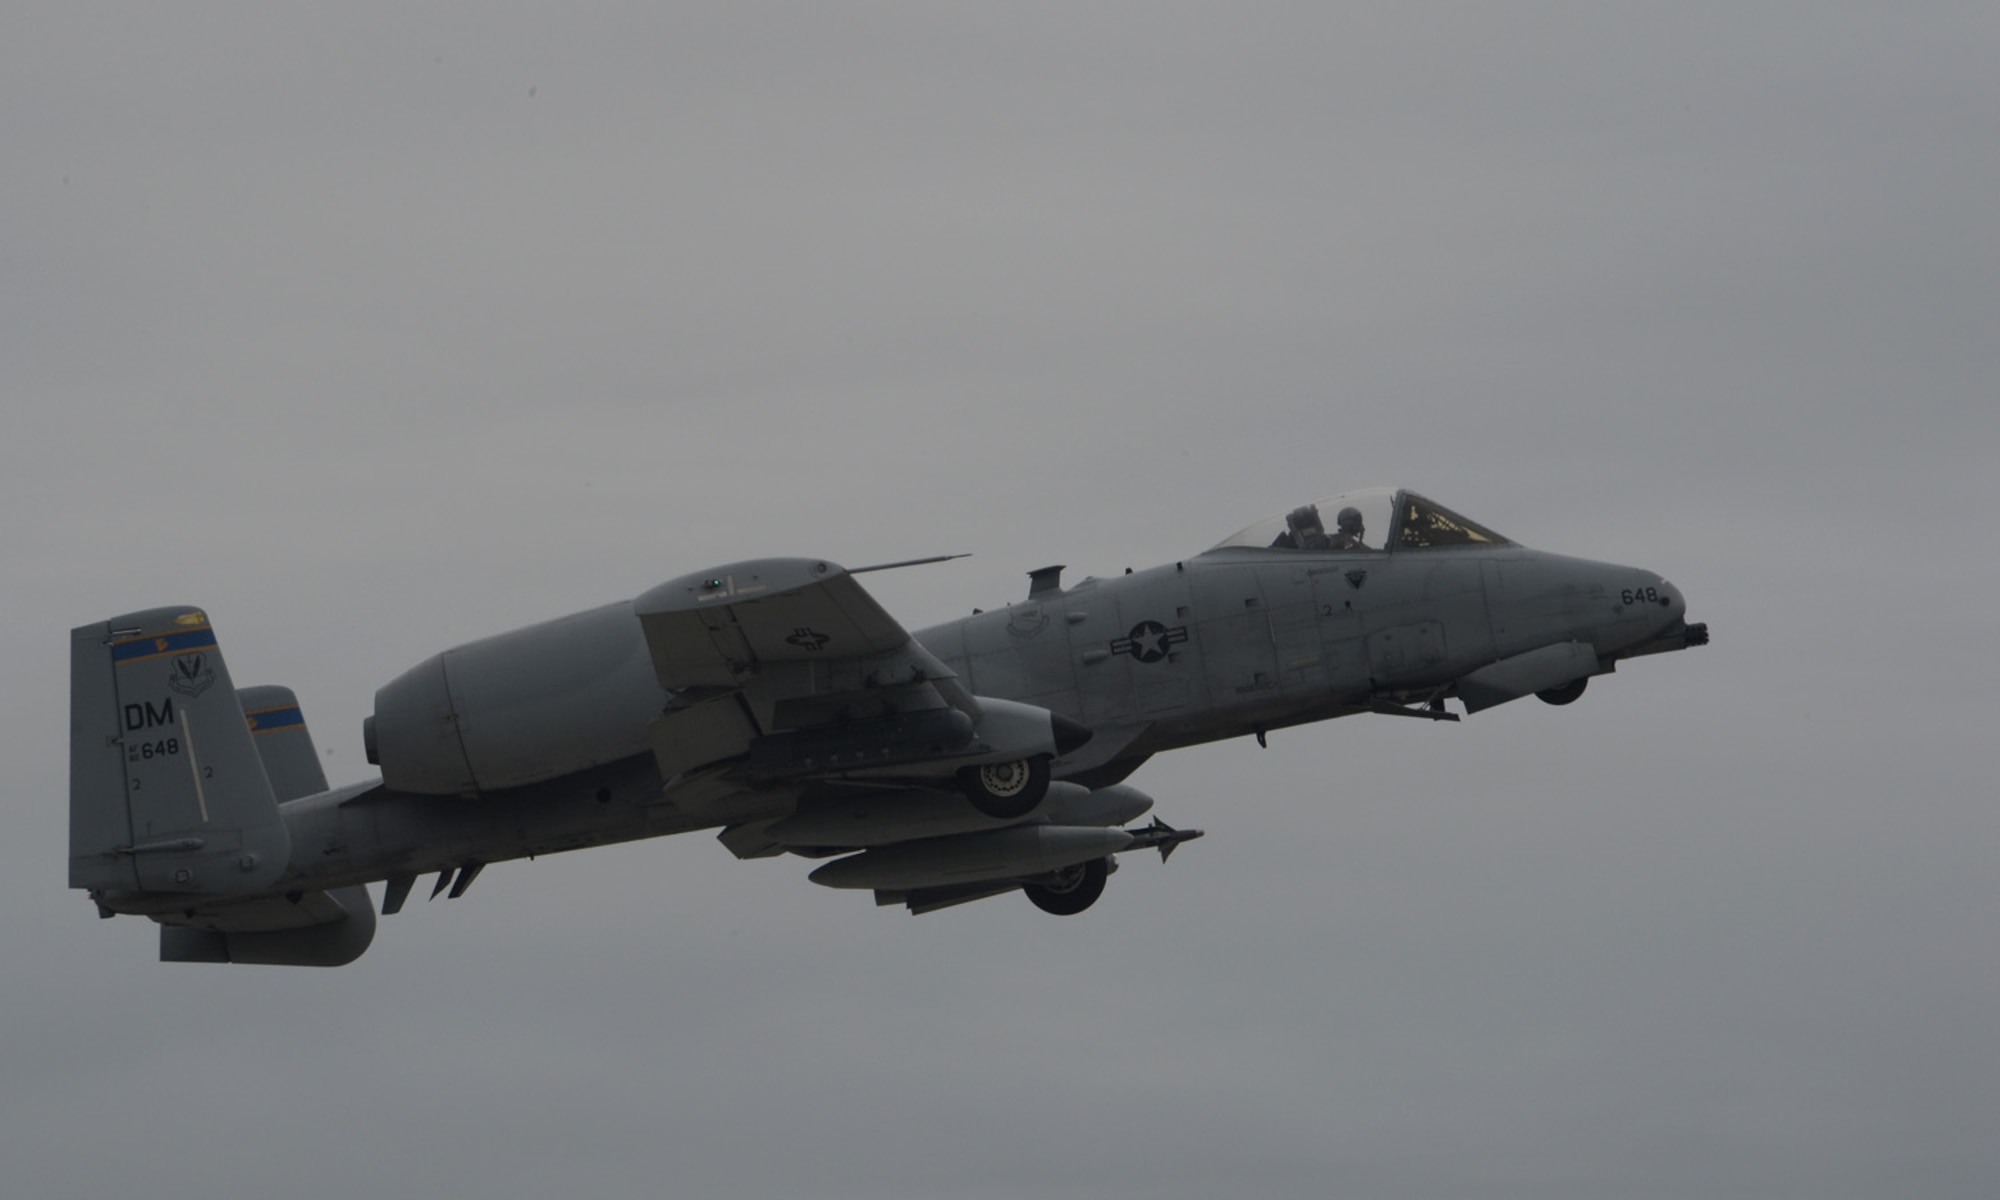 A U.S. Air Force A-10 Thunderbolt II attack aircraft assigned to the 354th Expeditionary Fighter Squadron takes off during a theater security package deployment at Sliac Air Base, Slovakia, May 22, 2015. The U.S. and Slovak air forces will conduct training aimed to strengthen interoperability and demonstrate the countries' shared commitment to the security and stability of Europe. (U.S. Air Force photo by Senior Airman Dylan Nuckolls/Released)